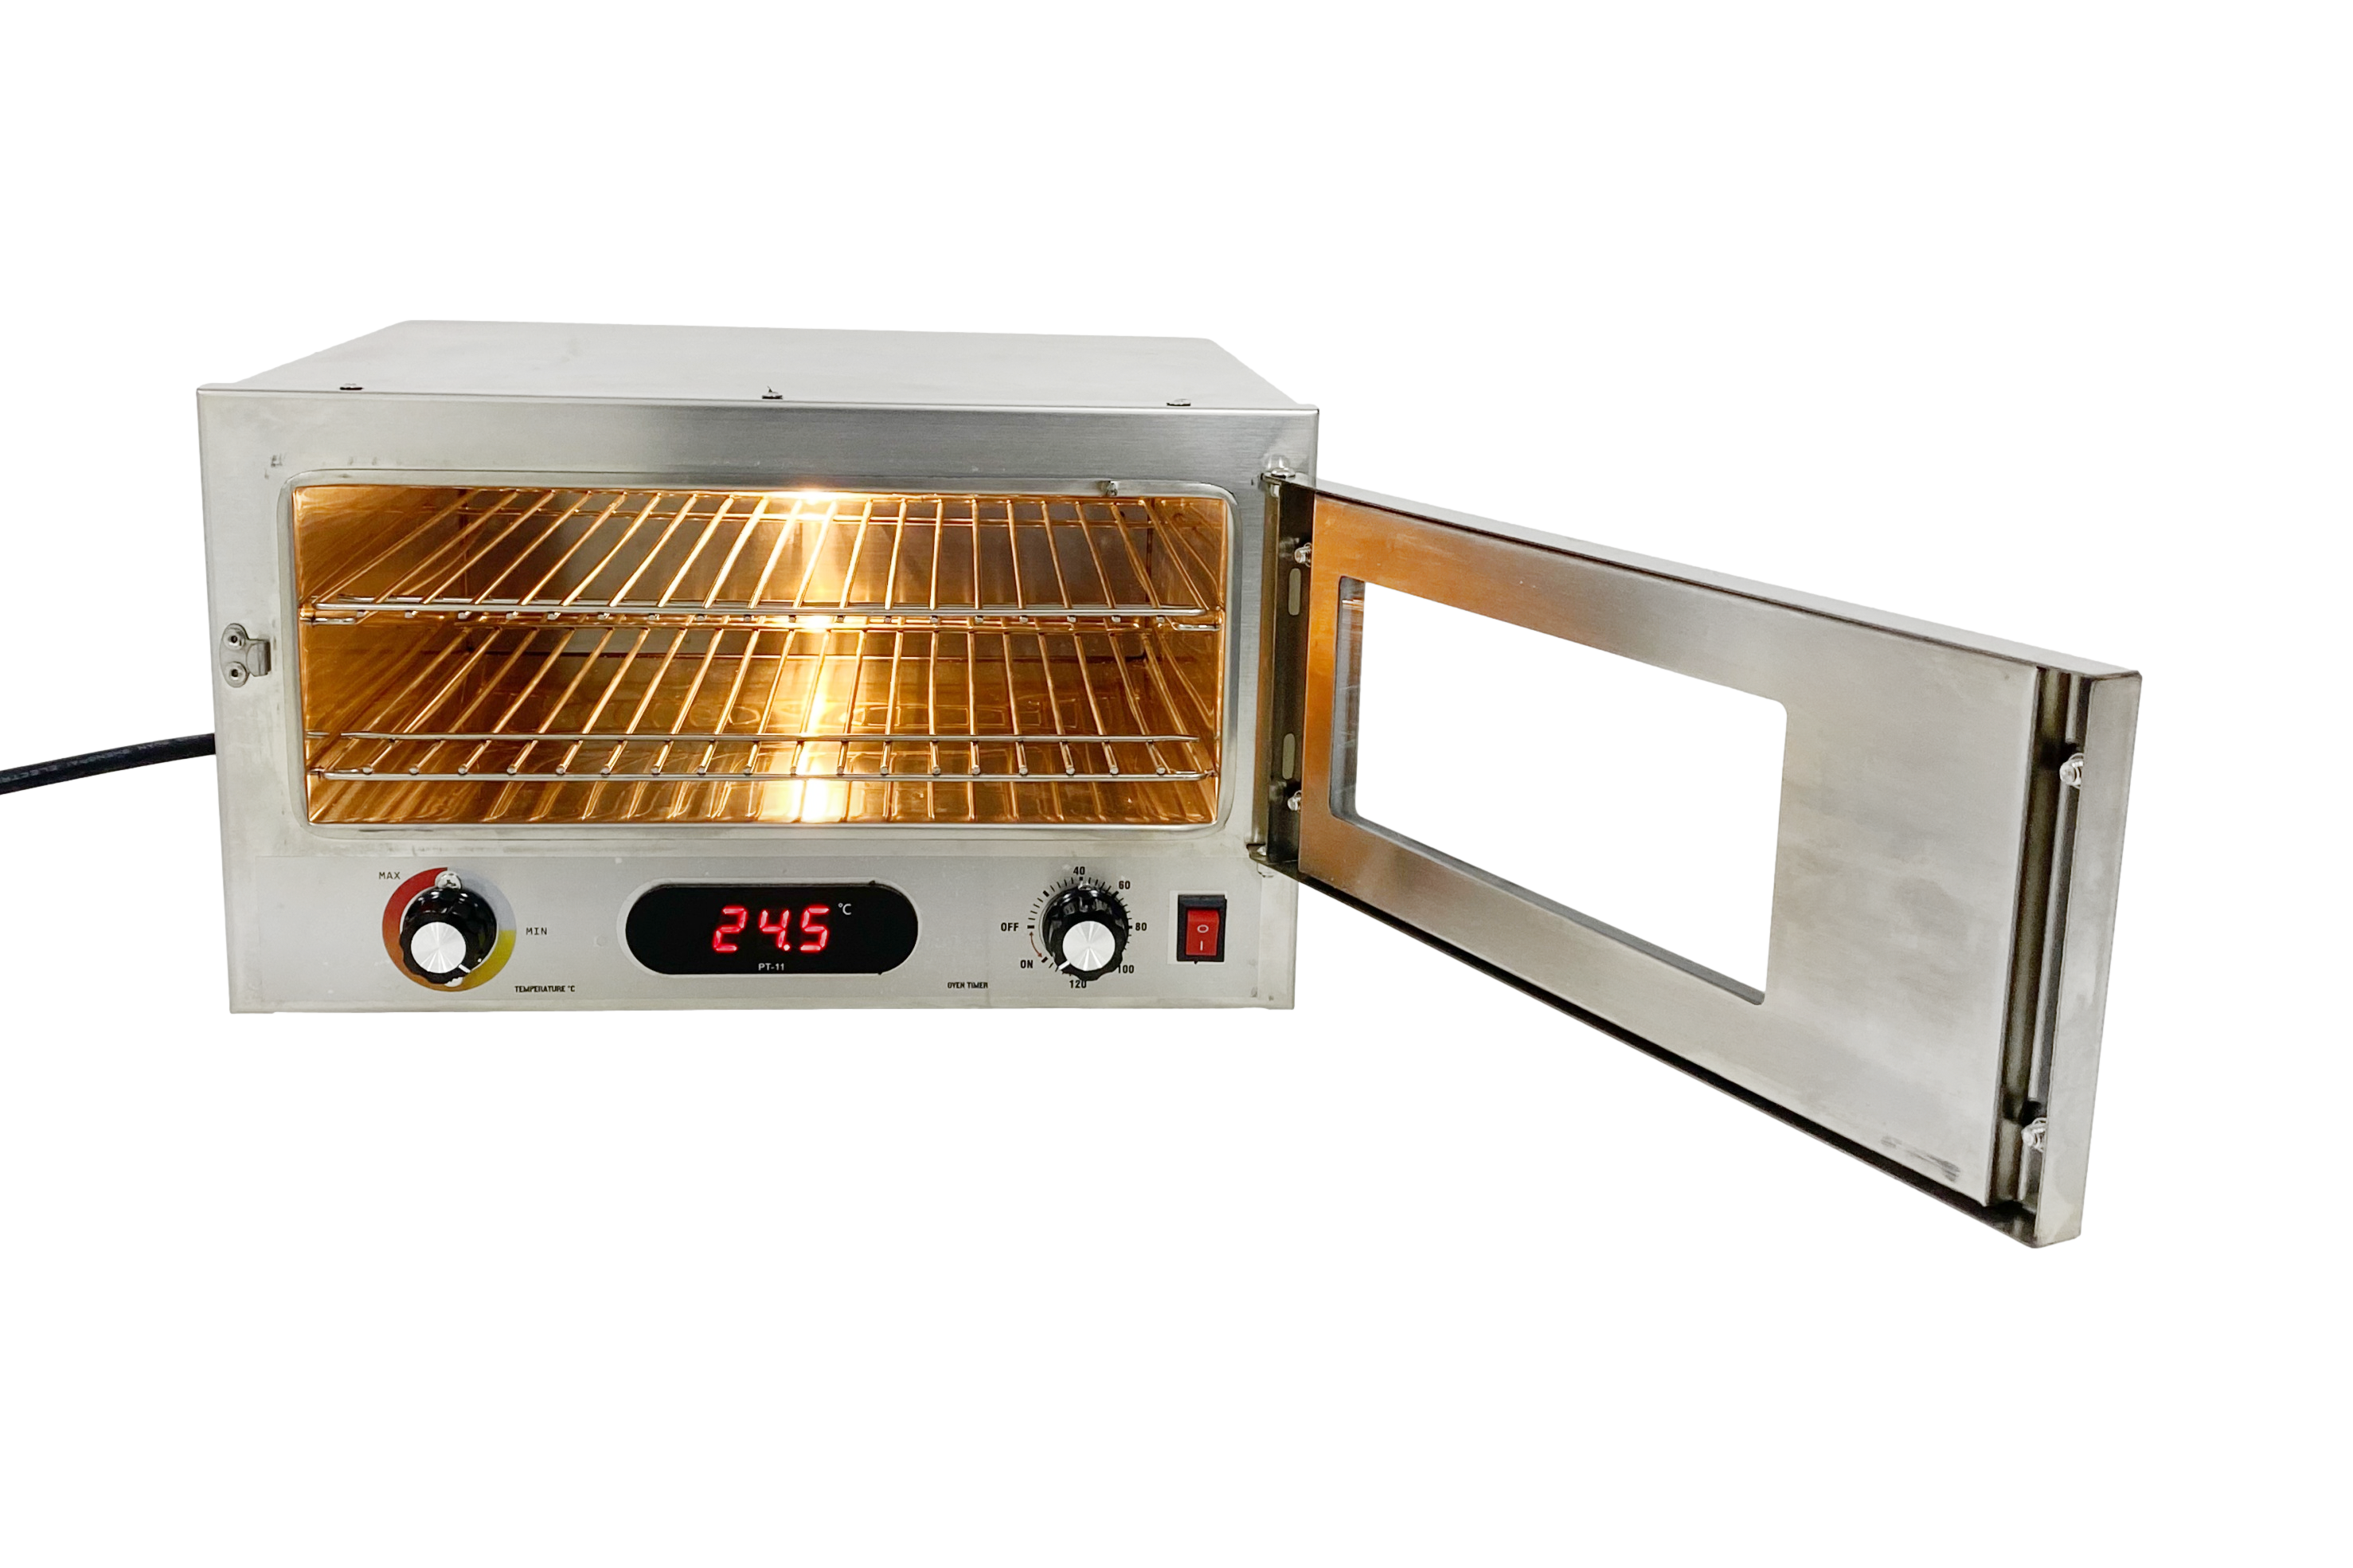 Thorny Devil™ 12V Digital Camping 4WD Travel Oven with Timer (Stainless Steel Casing & Fibreglass Insulation)